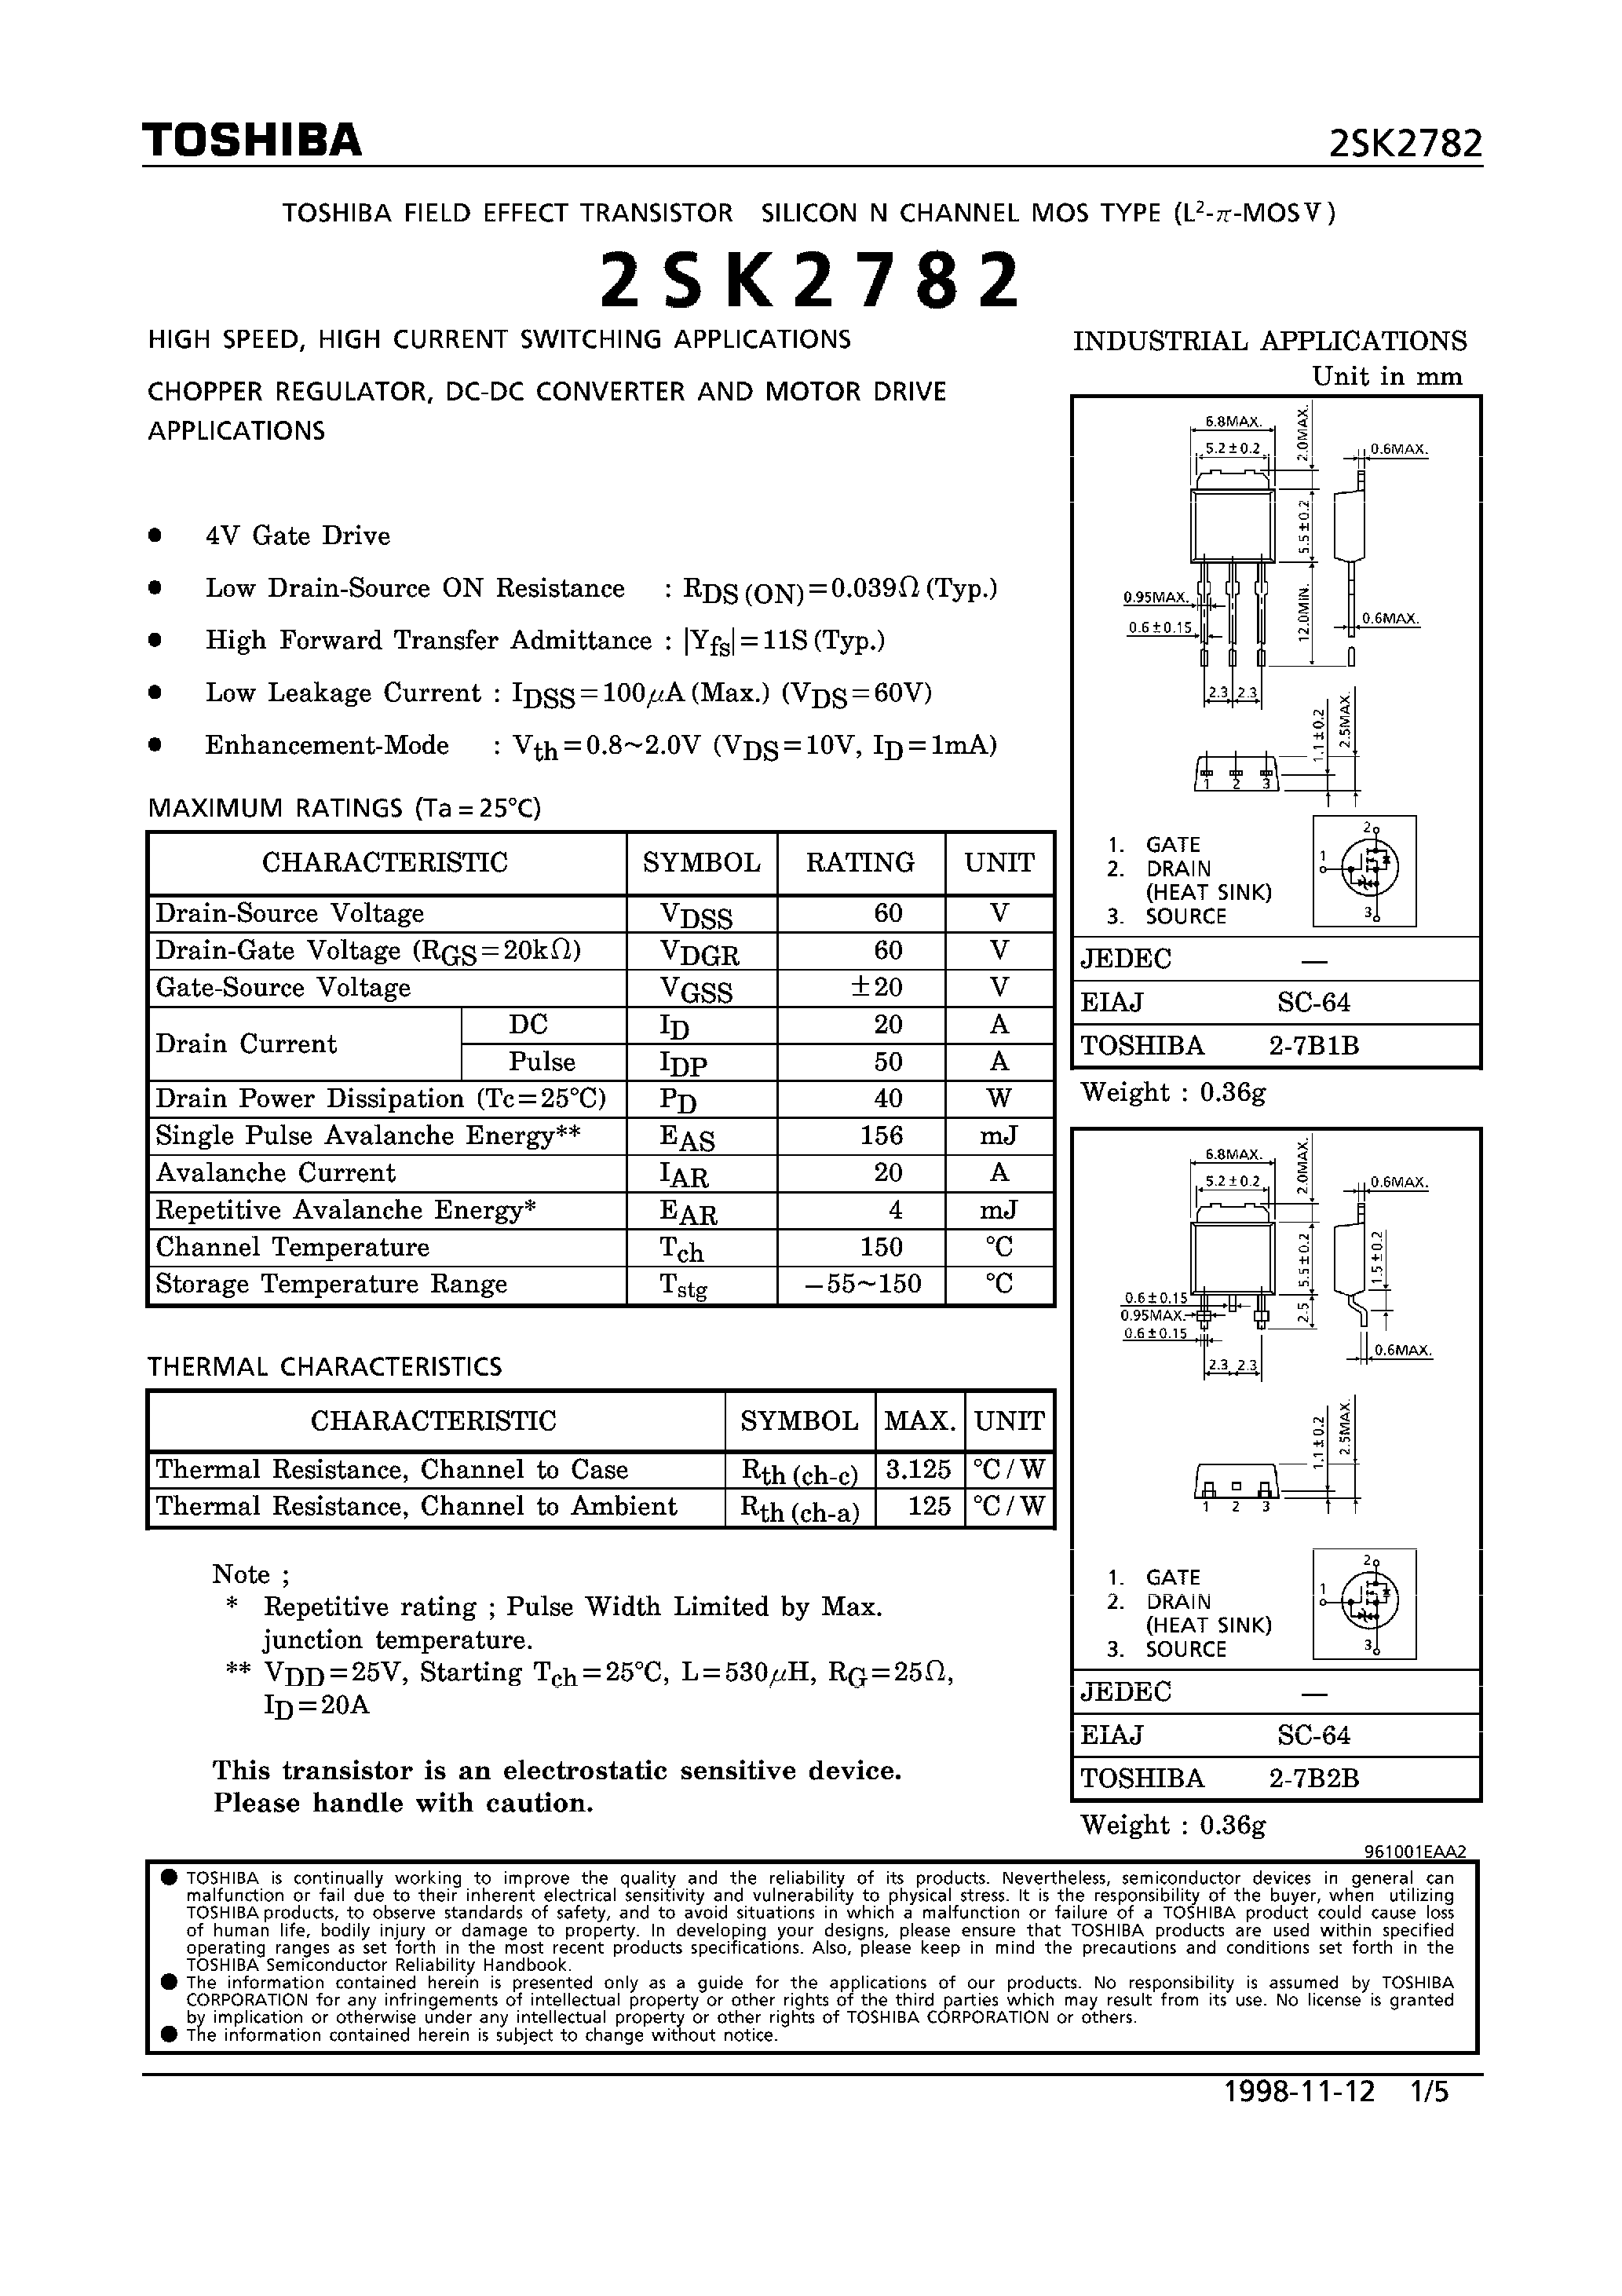 Datasheet K2782 - Search -----> 2SK2782 page 1